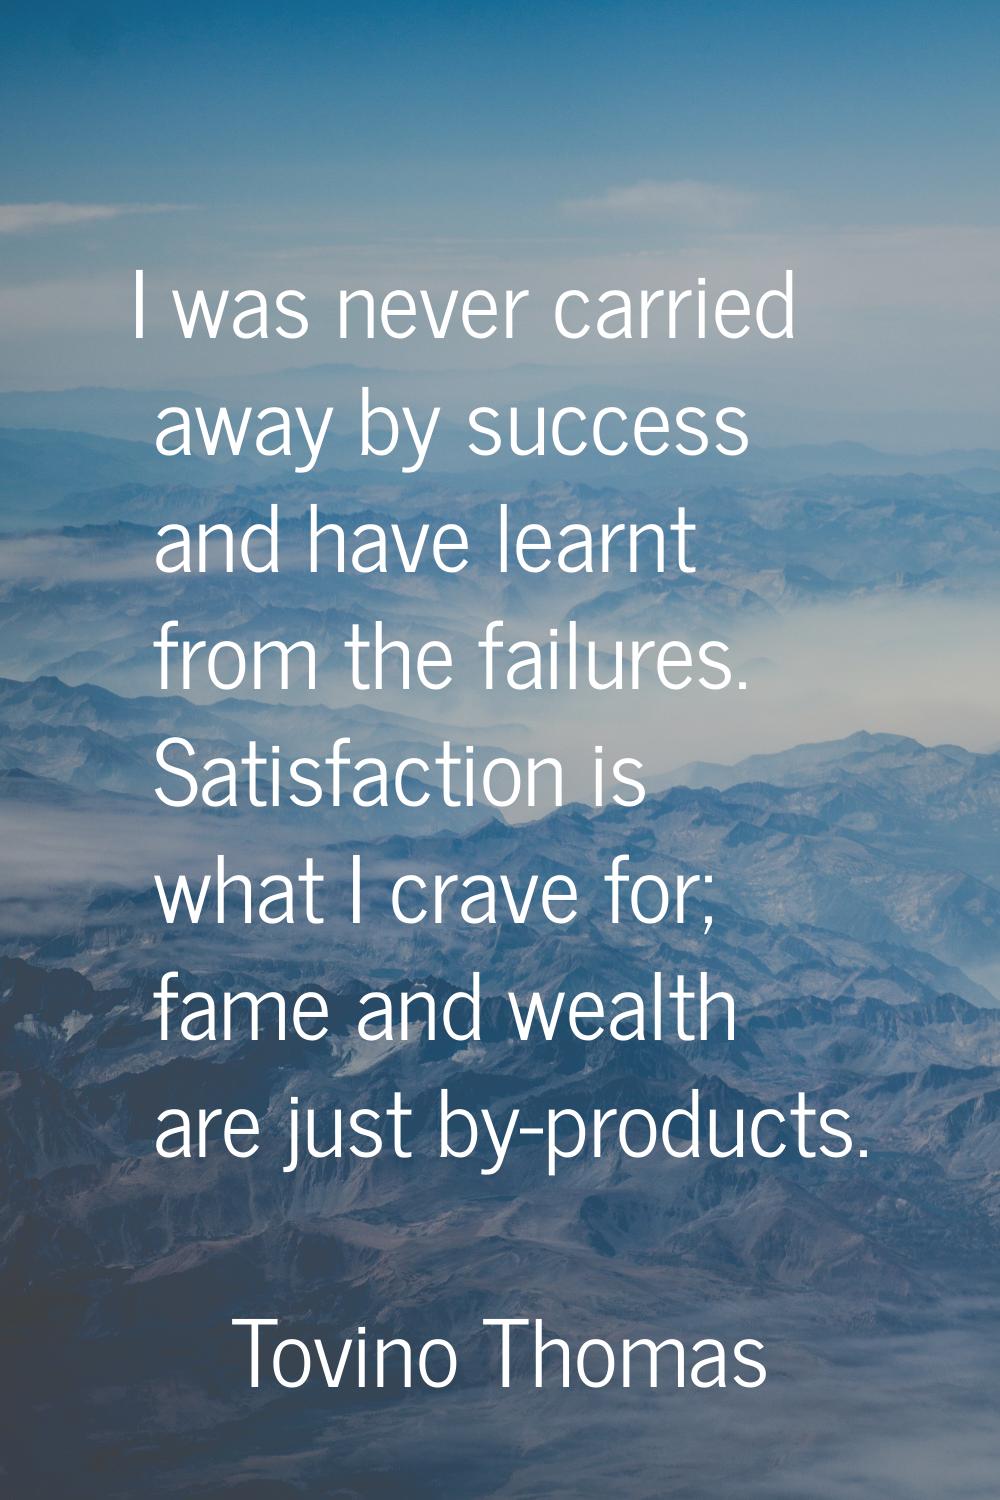 I was never carried away by success and have learnt from the failures. Satisfaction is what I crave